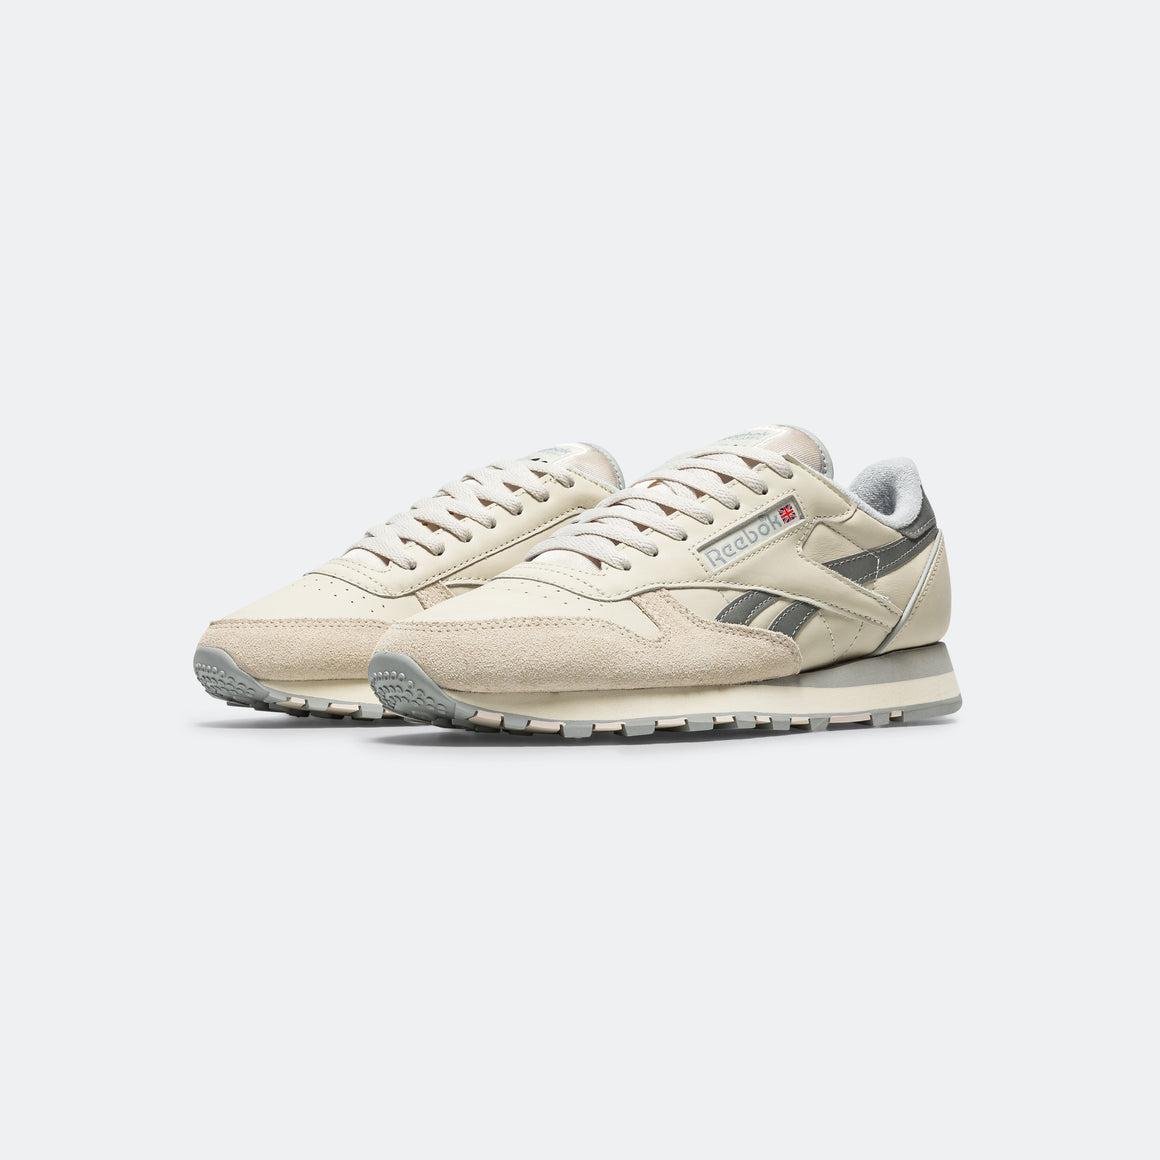 Reebok - Classic Leather 1983 Vintage - Alabaster/Pure Grey - UP THERE